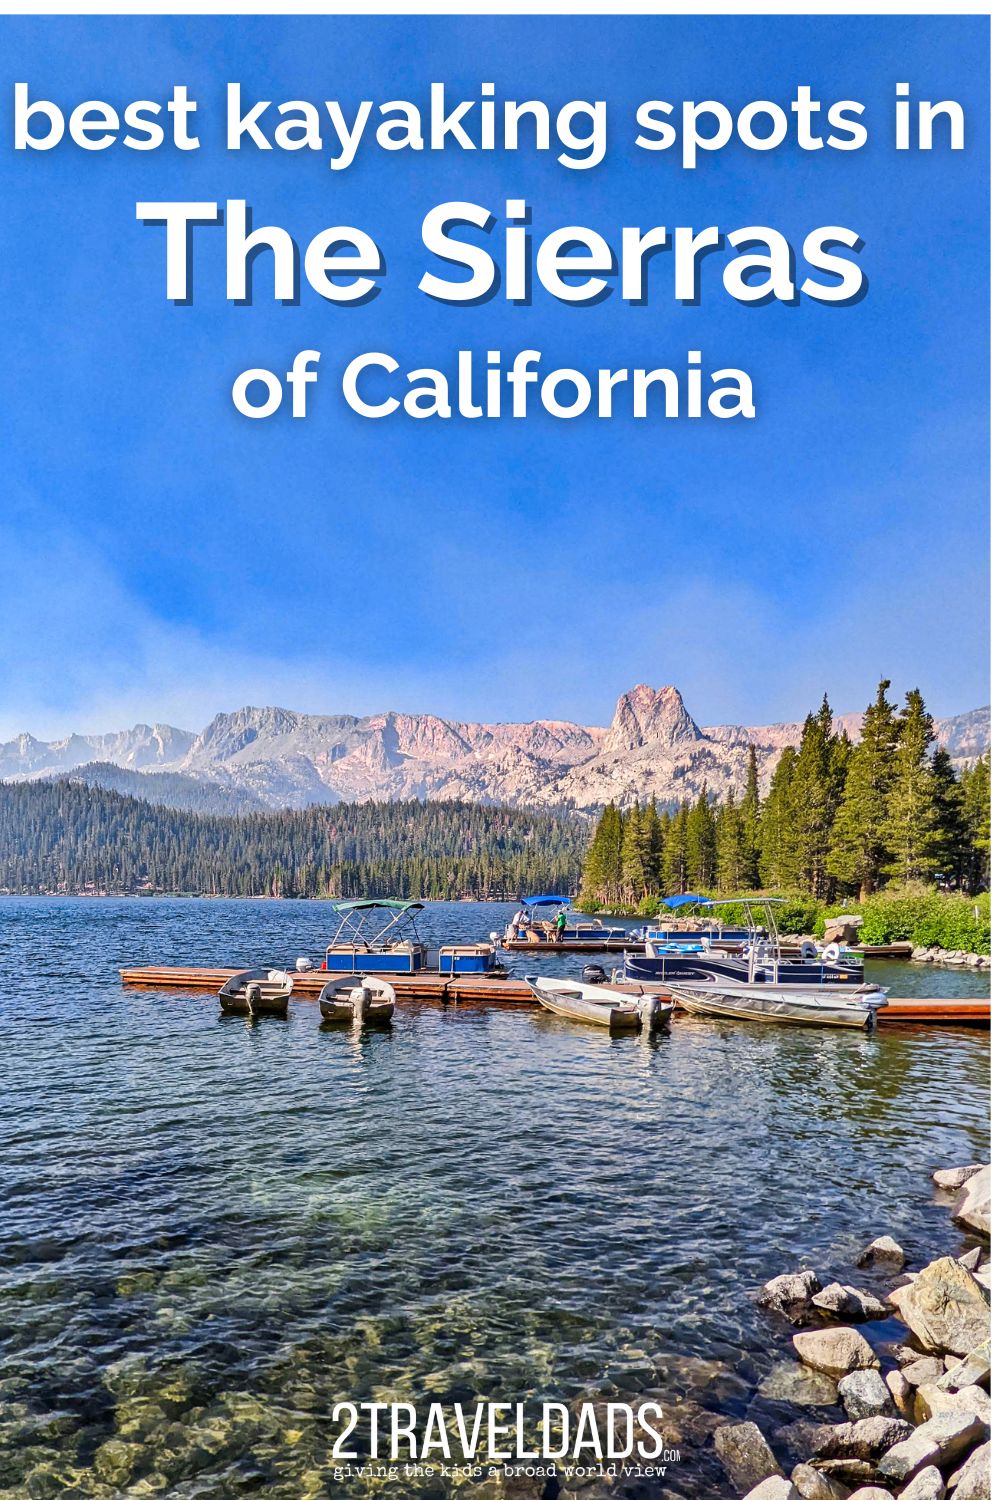 Kayaking in California's Sierras is a gorgeous and wild experience. From paddling on the Merced River out of Yosemite National Park to the crystal blue waters of Lake Tahoe, 15+ spots for kayaking and SUP in the Sierras.